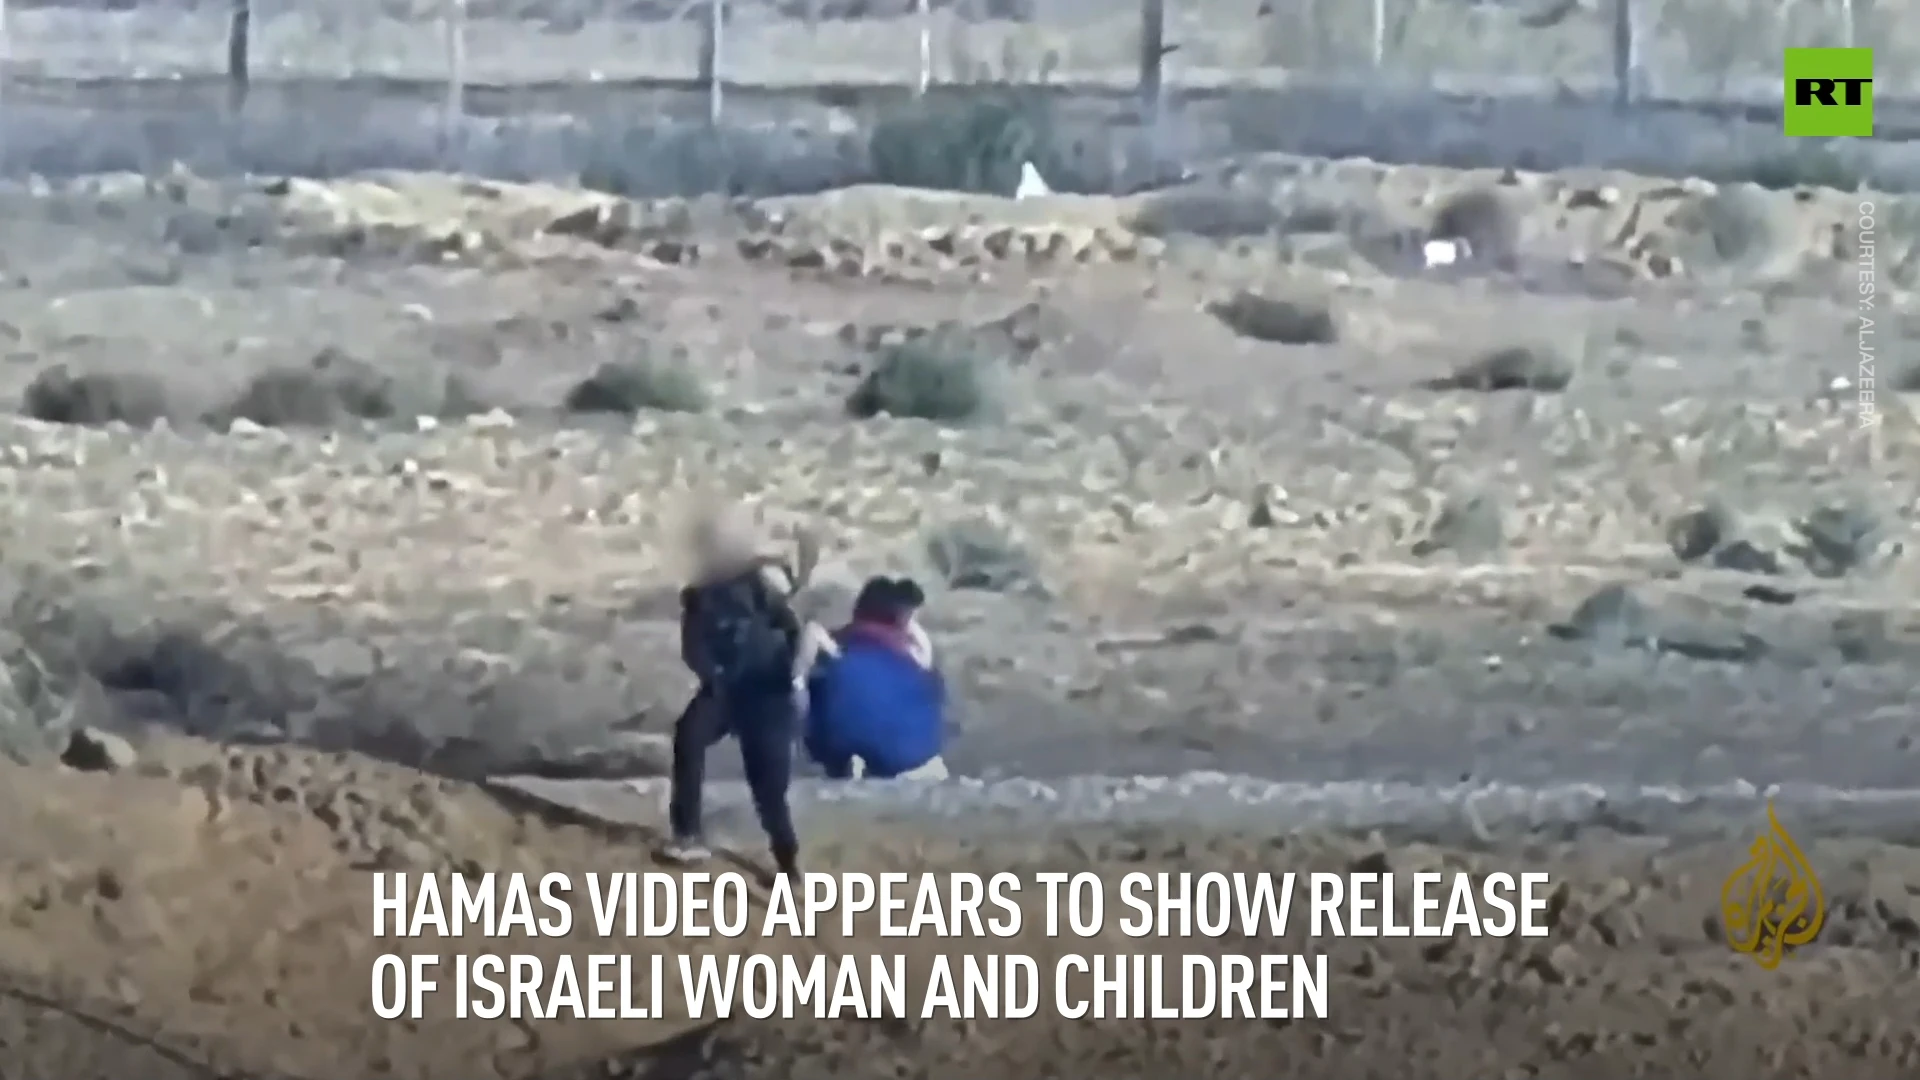 Hamas video appears to show release of Israeli woman and children